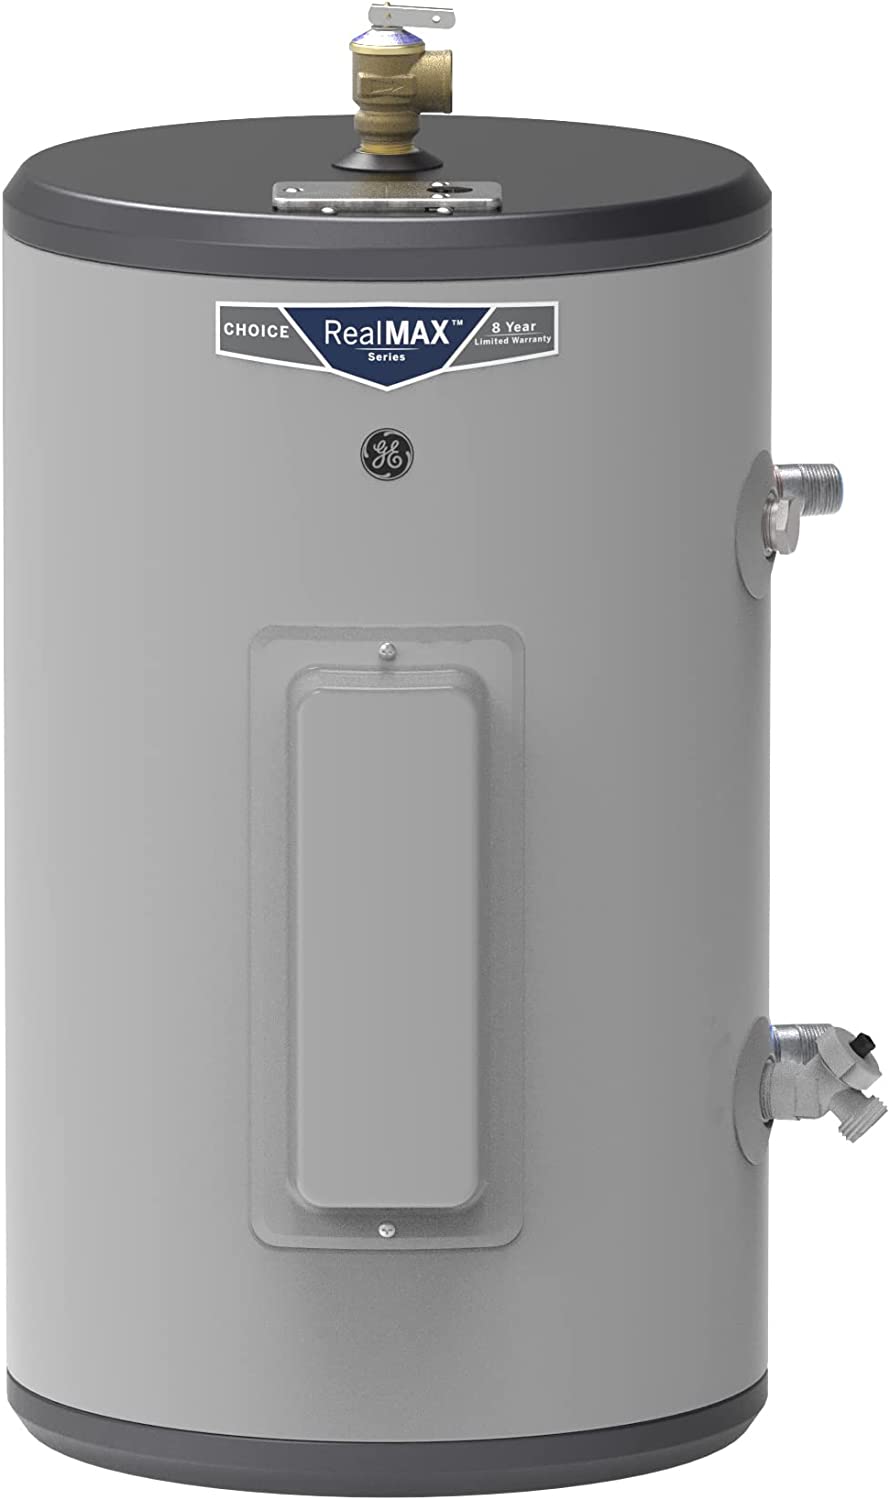 GE APPLIANCES Point of Use Water Heater | Electric [...]